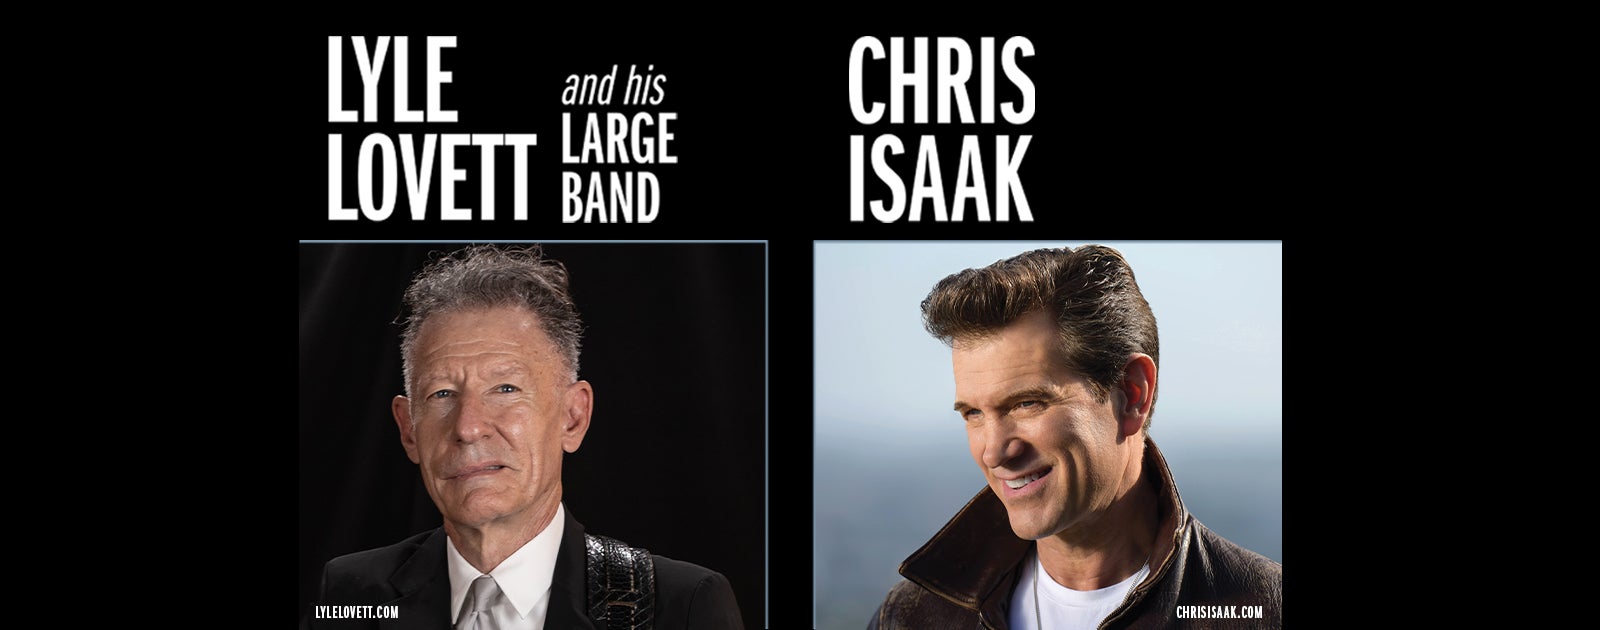 Lyle Lovett and His Large Band and Chris Isaak